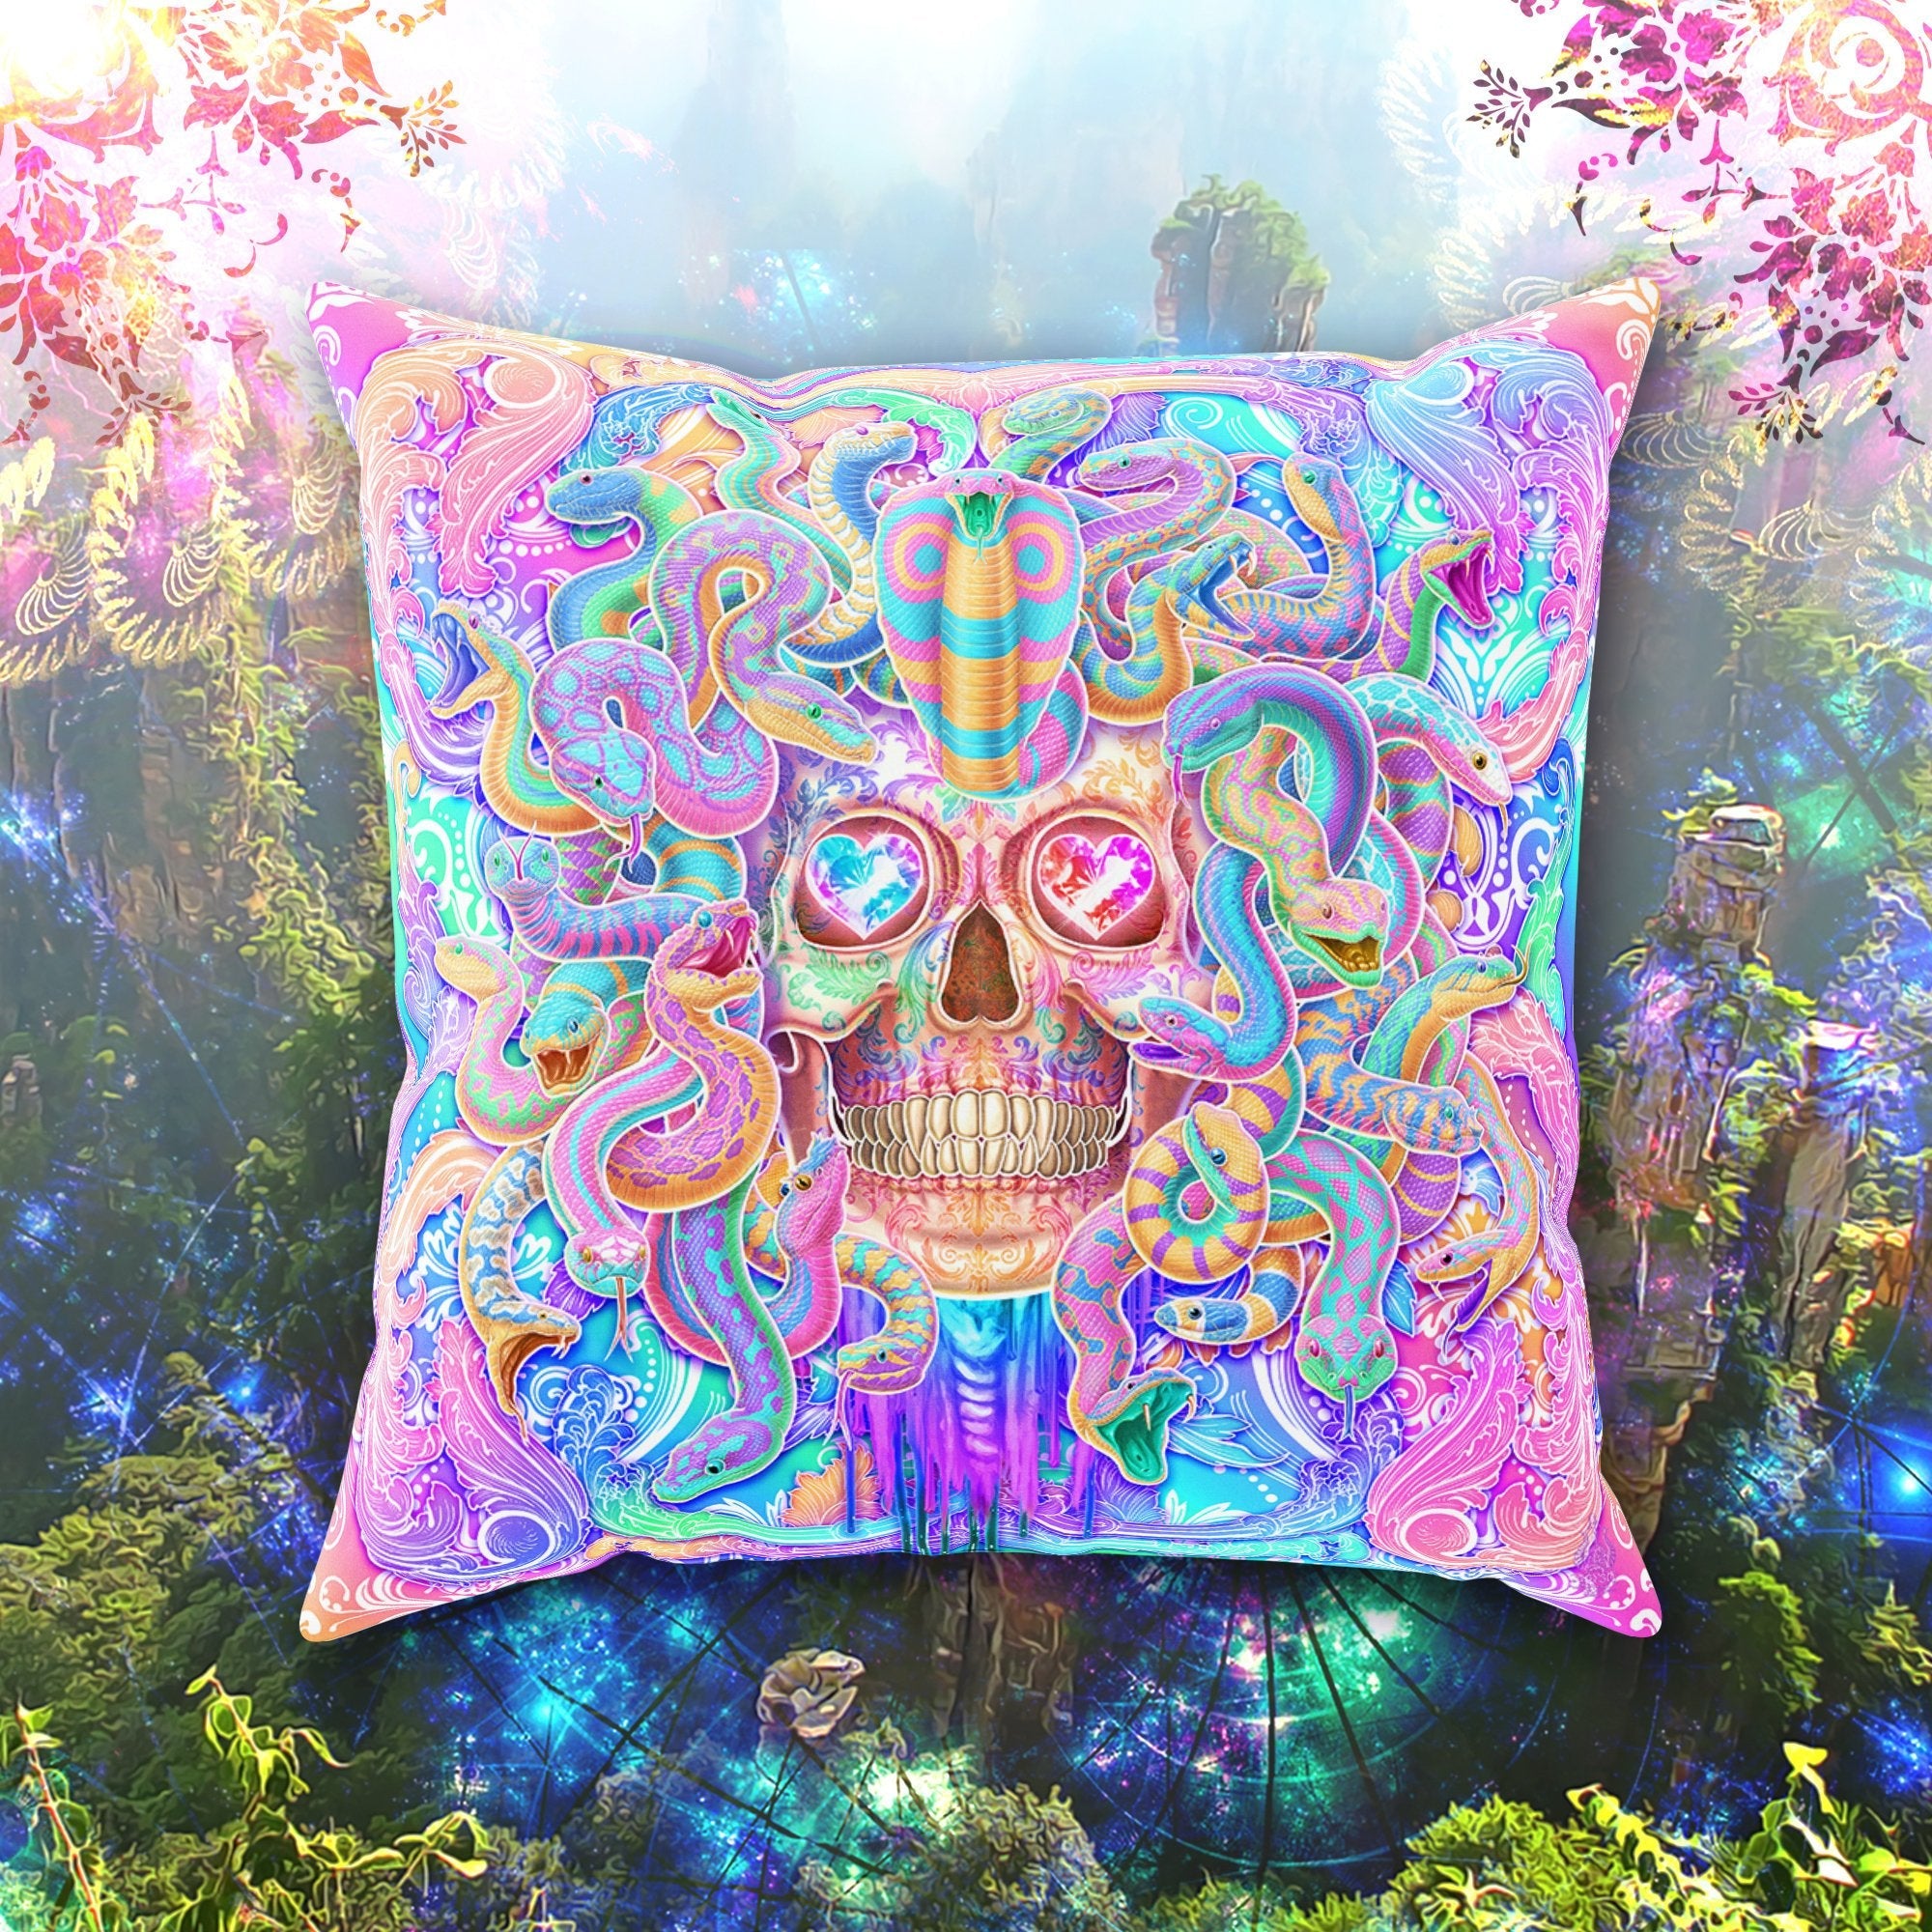 Pastel Skull Throw Pillow, Decorative Accent Cushion, Aesthetic Room Decor, Psychedelic Art, Funky and Eclectic Home - Medusa & Snakes - Abysm Internal